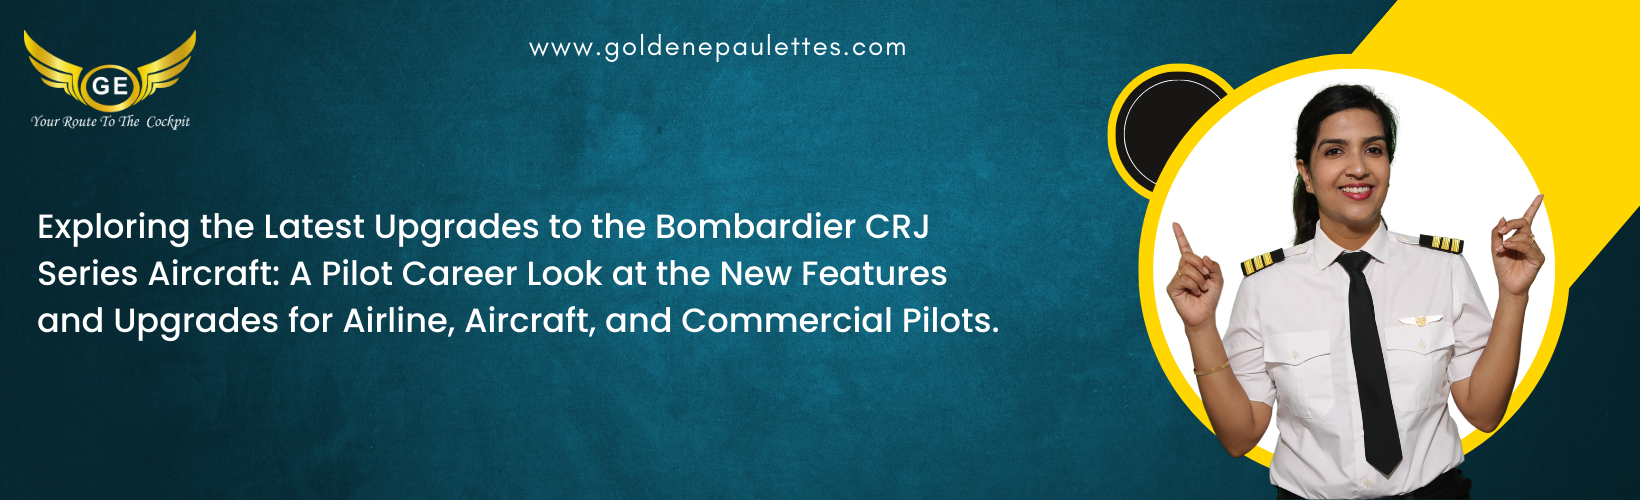 8.The Latest Upgrades to the Bombardier CRJ Series